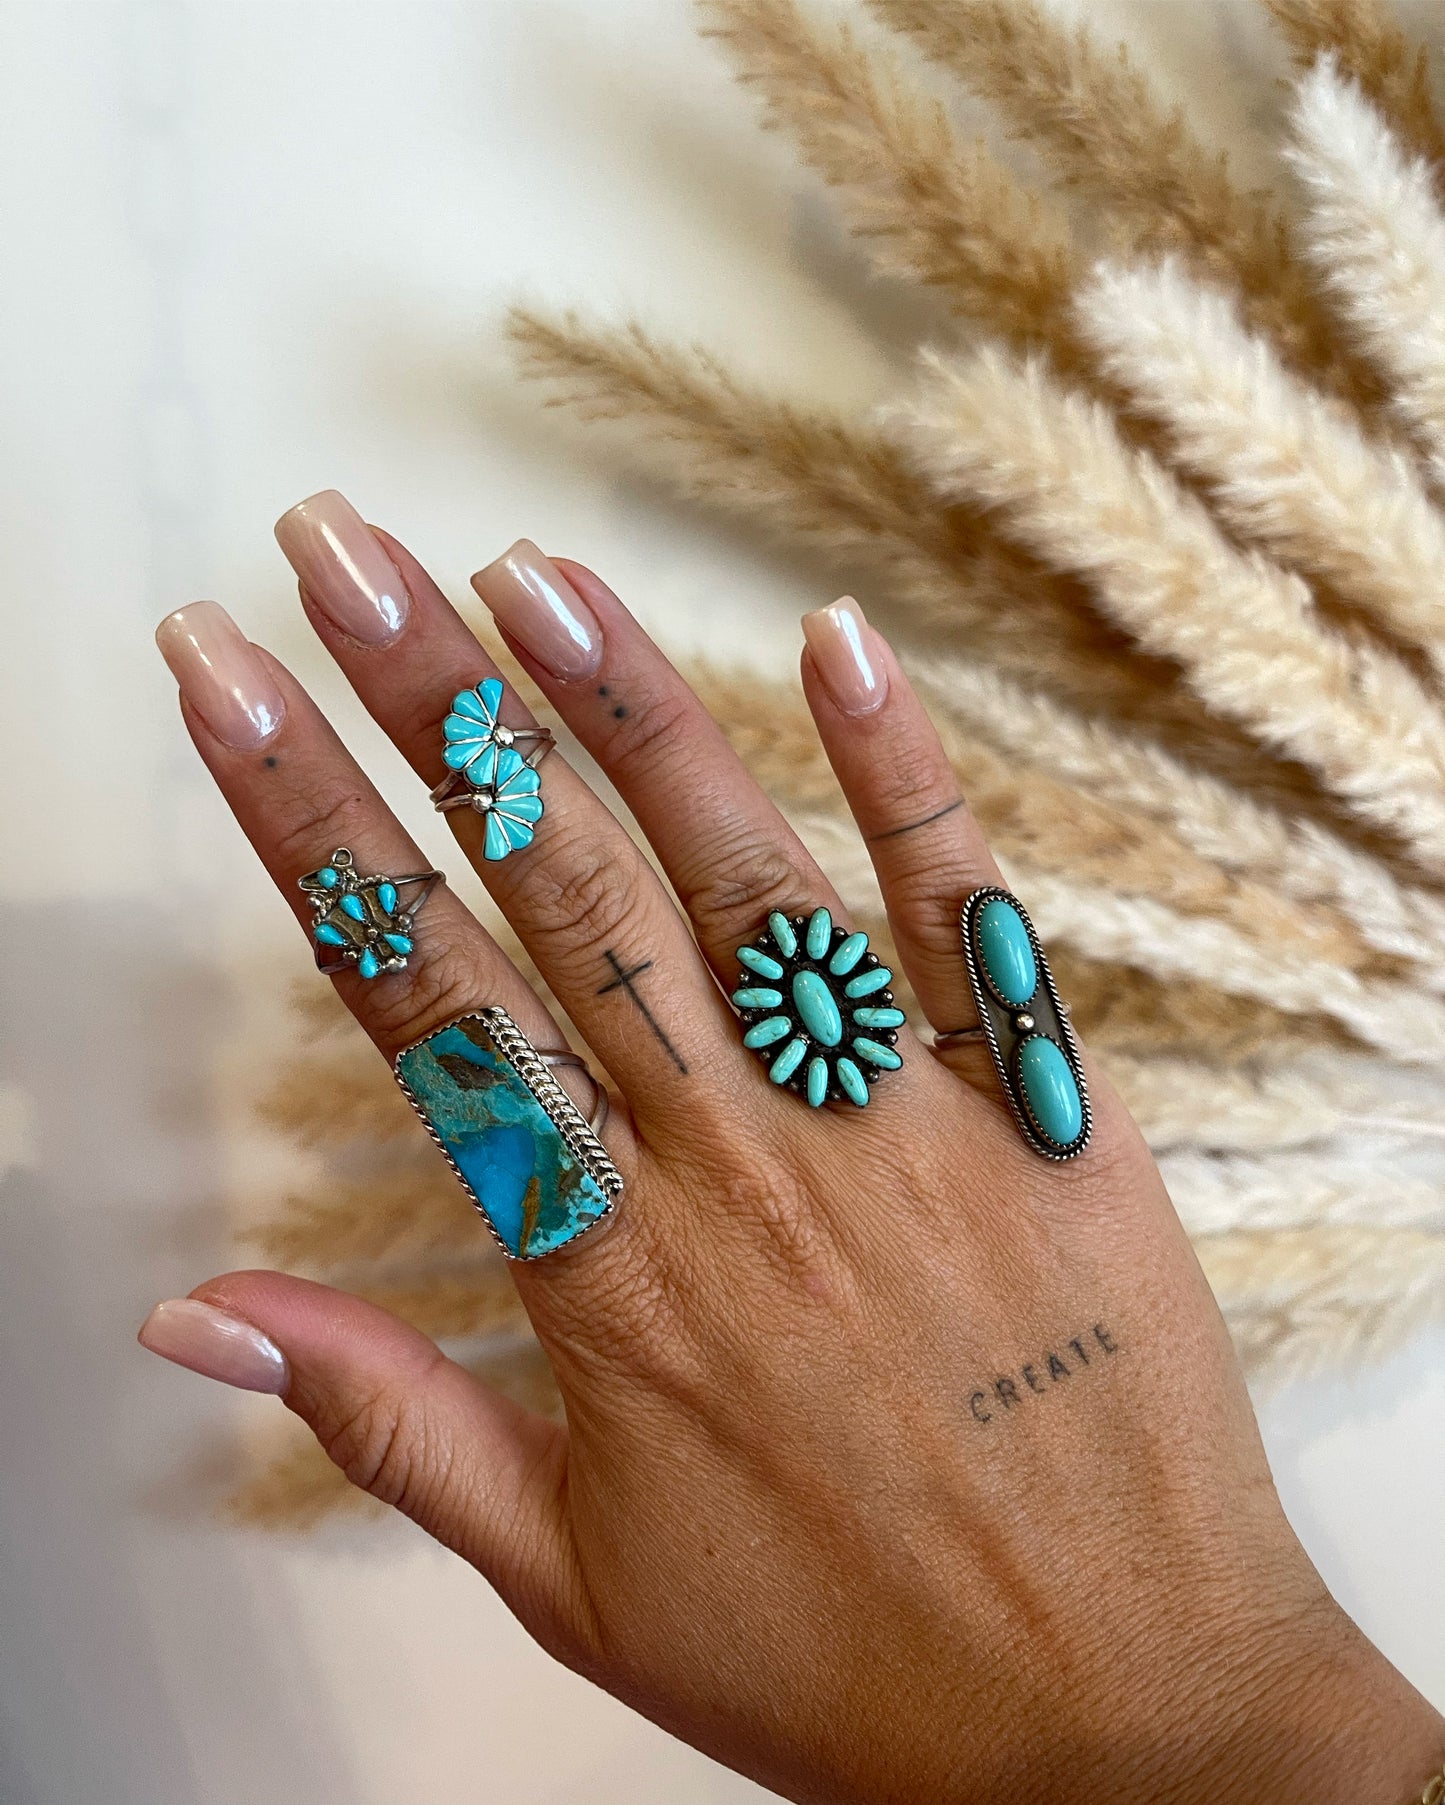 The Vintage Turquoise Seahorse Ring